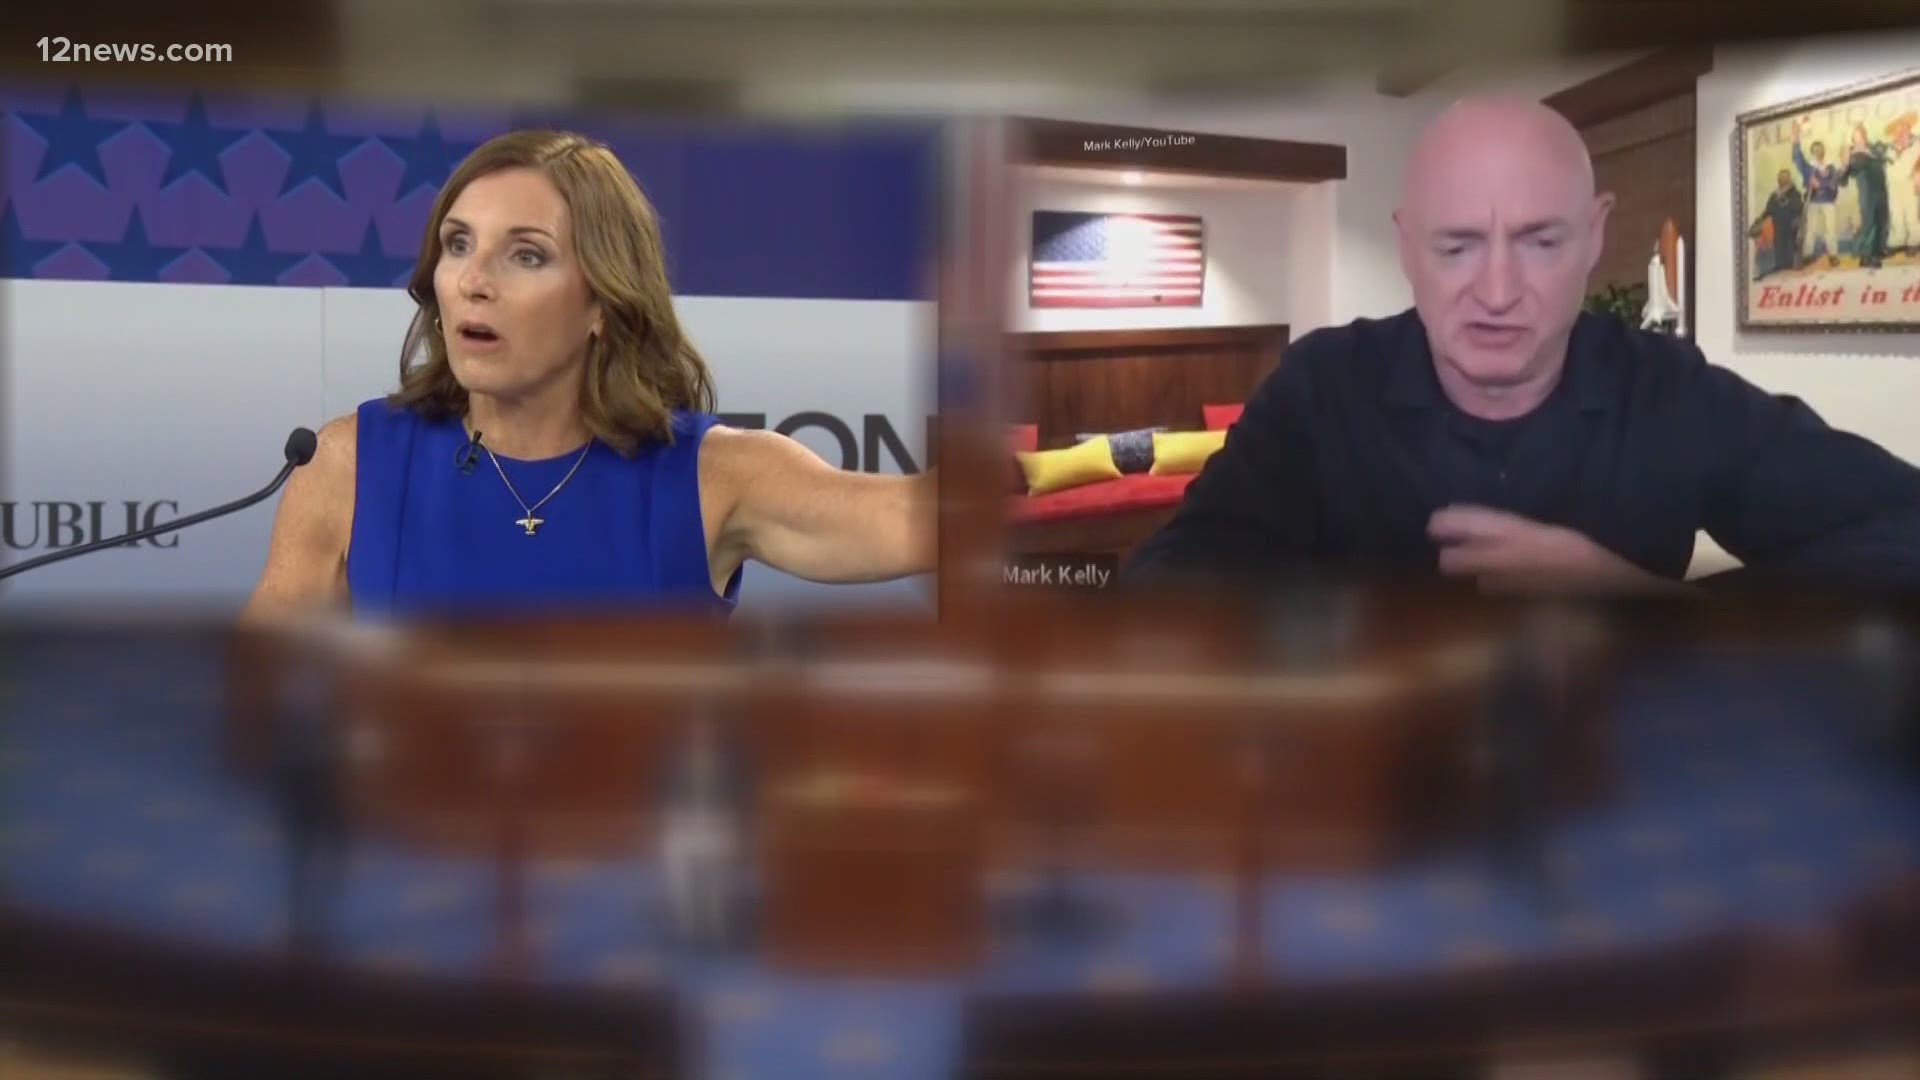 A political ad for Martha McSally links Mark Kelly to a company that the ad claims engaged in price gouging and surprise billing. 12 News fact checks the claim.